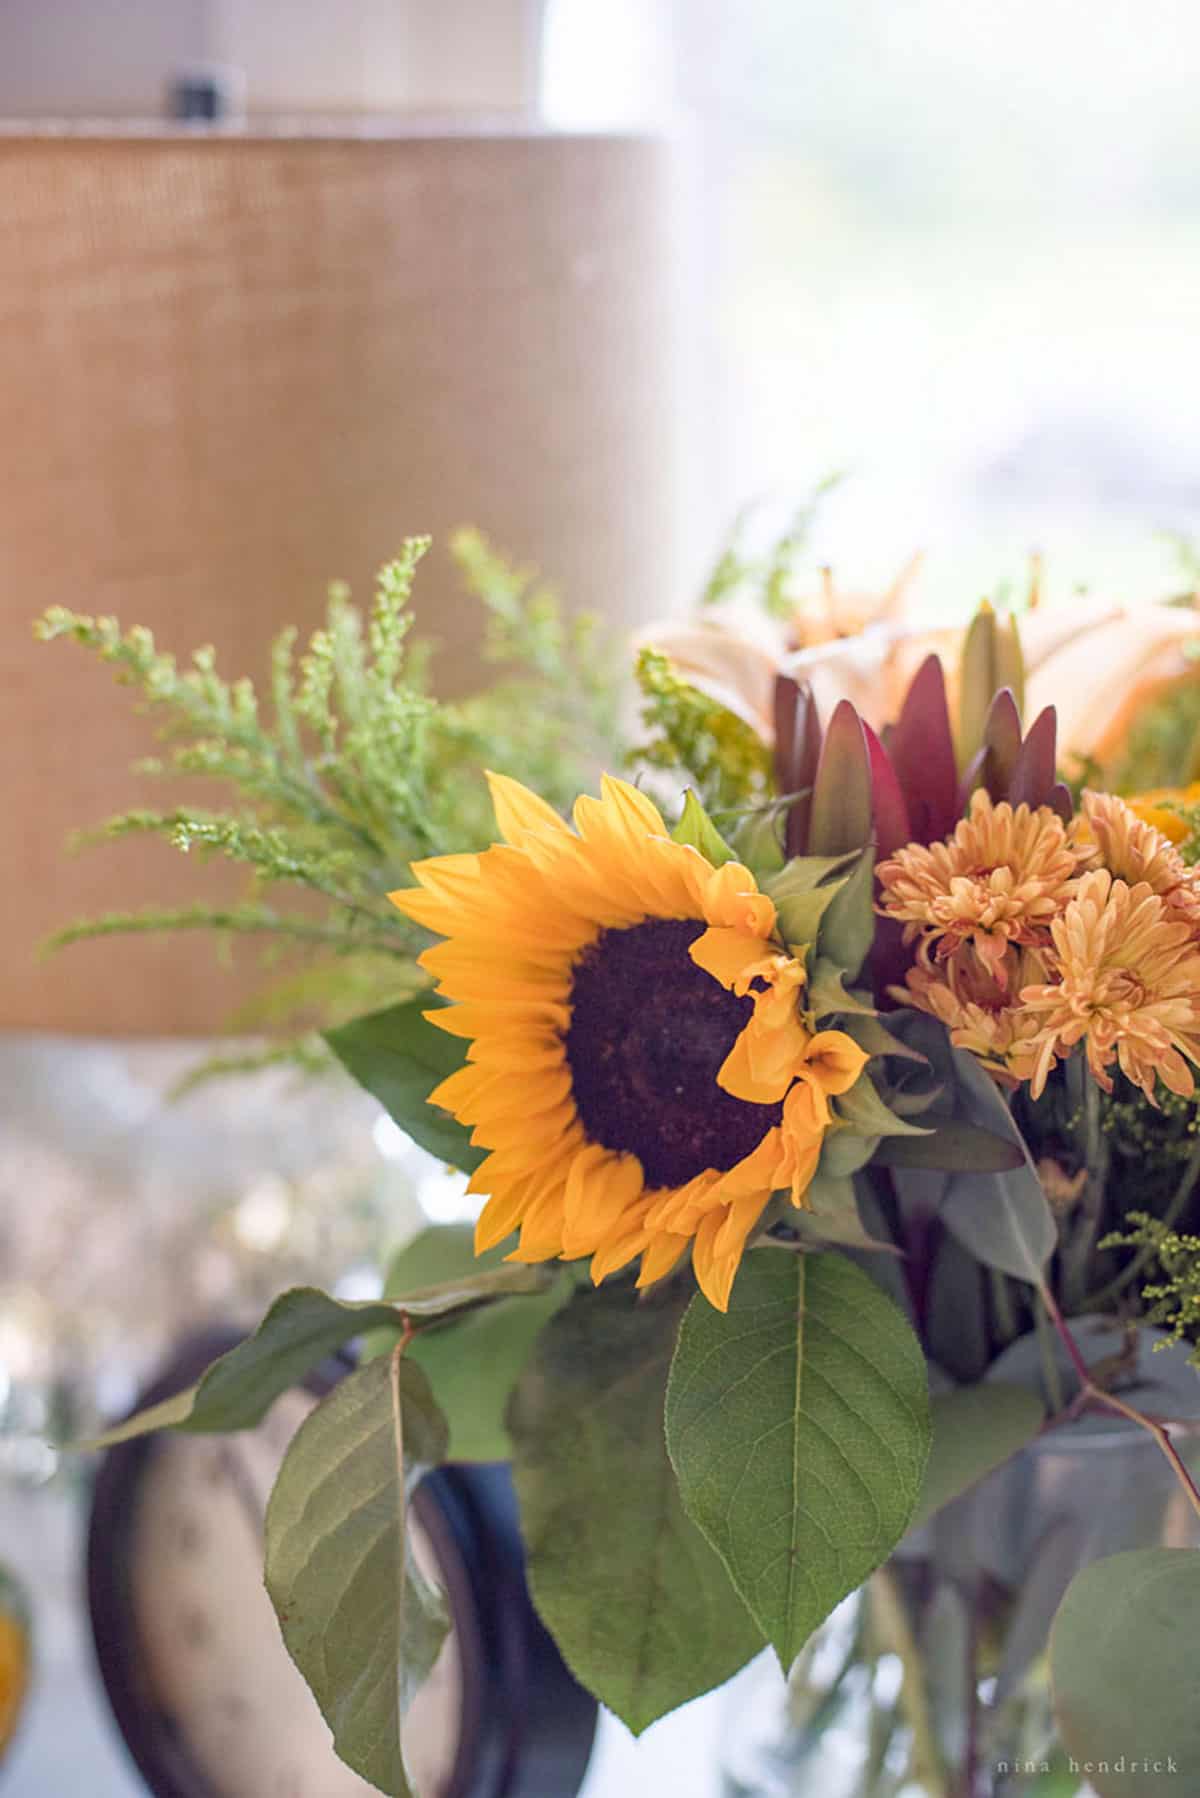 A table adorned with a vase of sunflowers for fall.